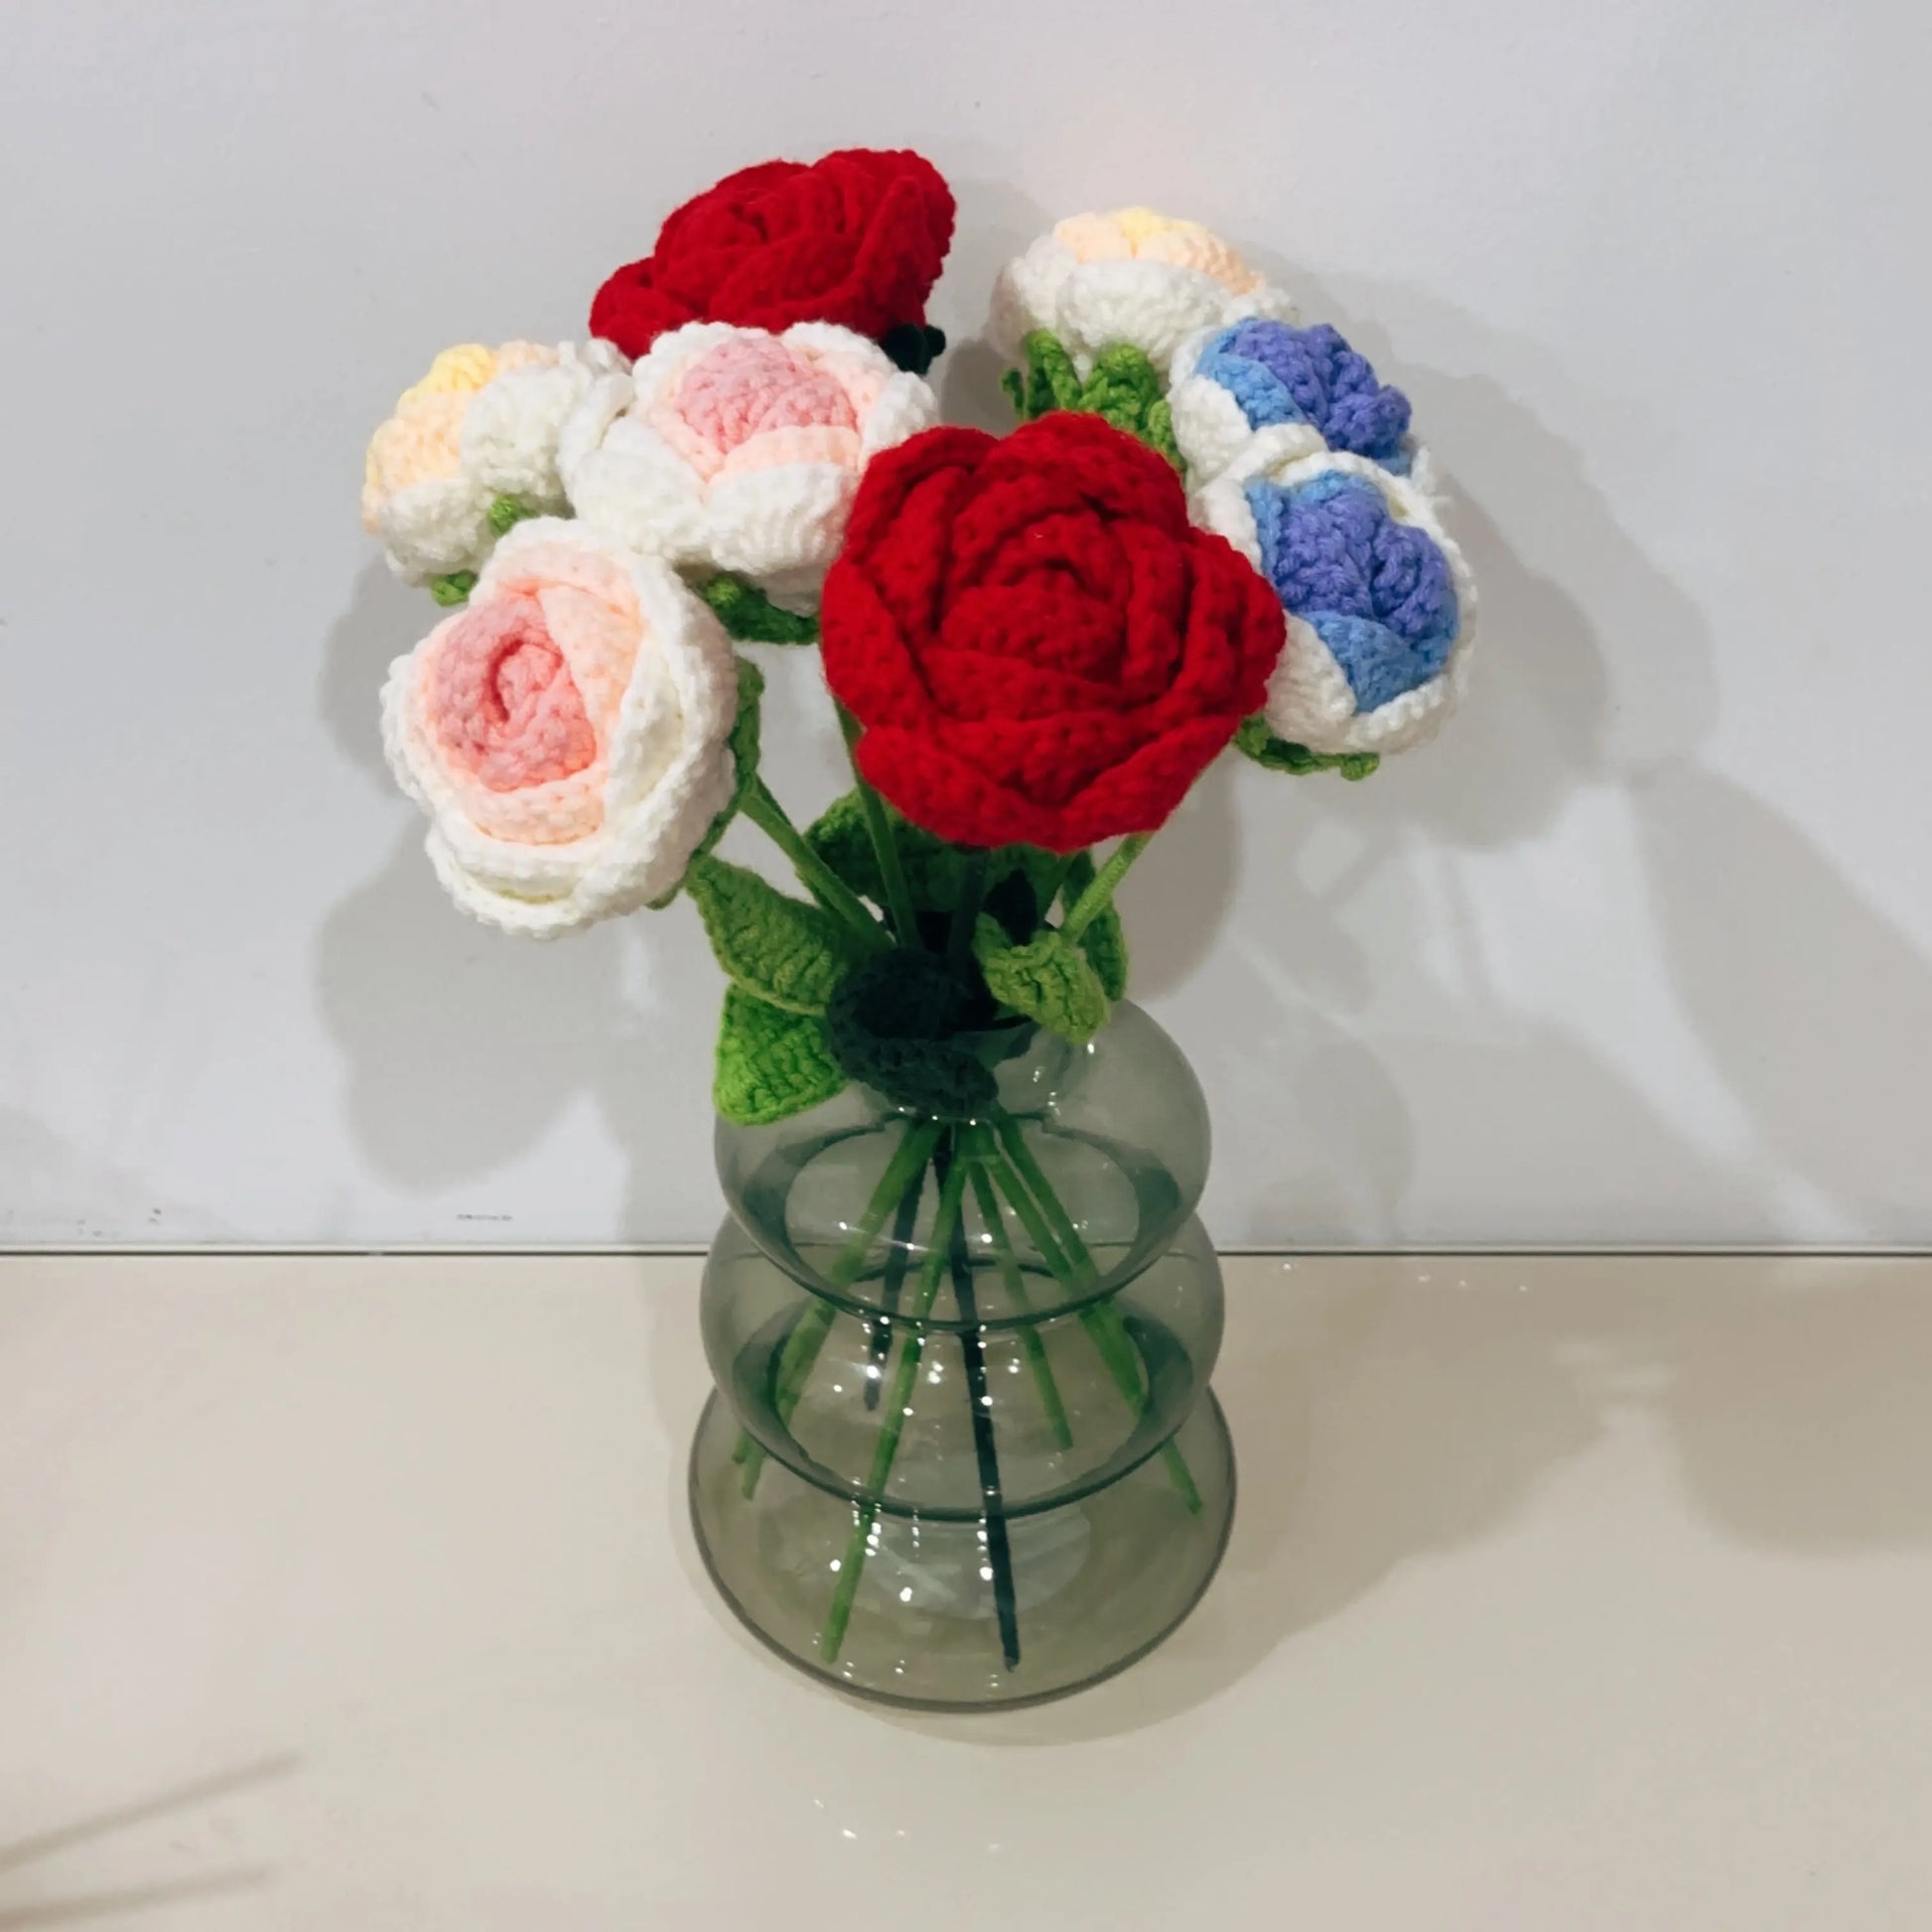 Hand knitted Woolen Roses Sunday's Creative